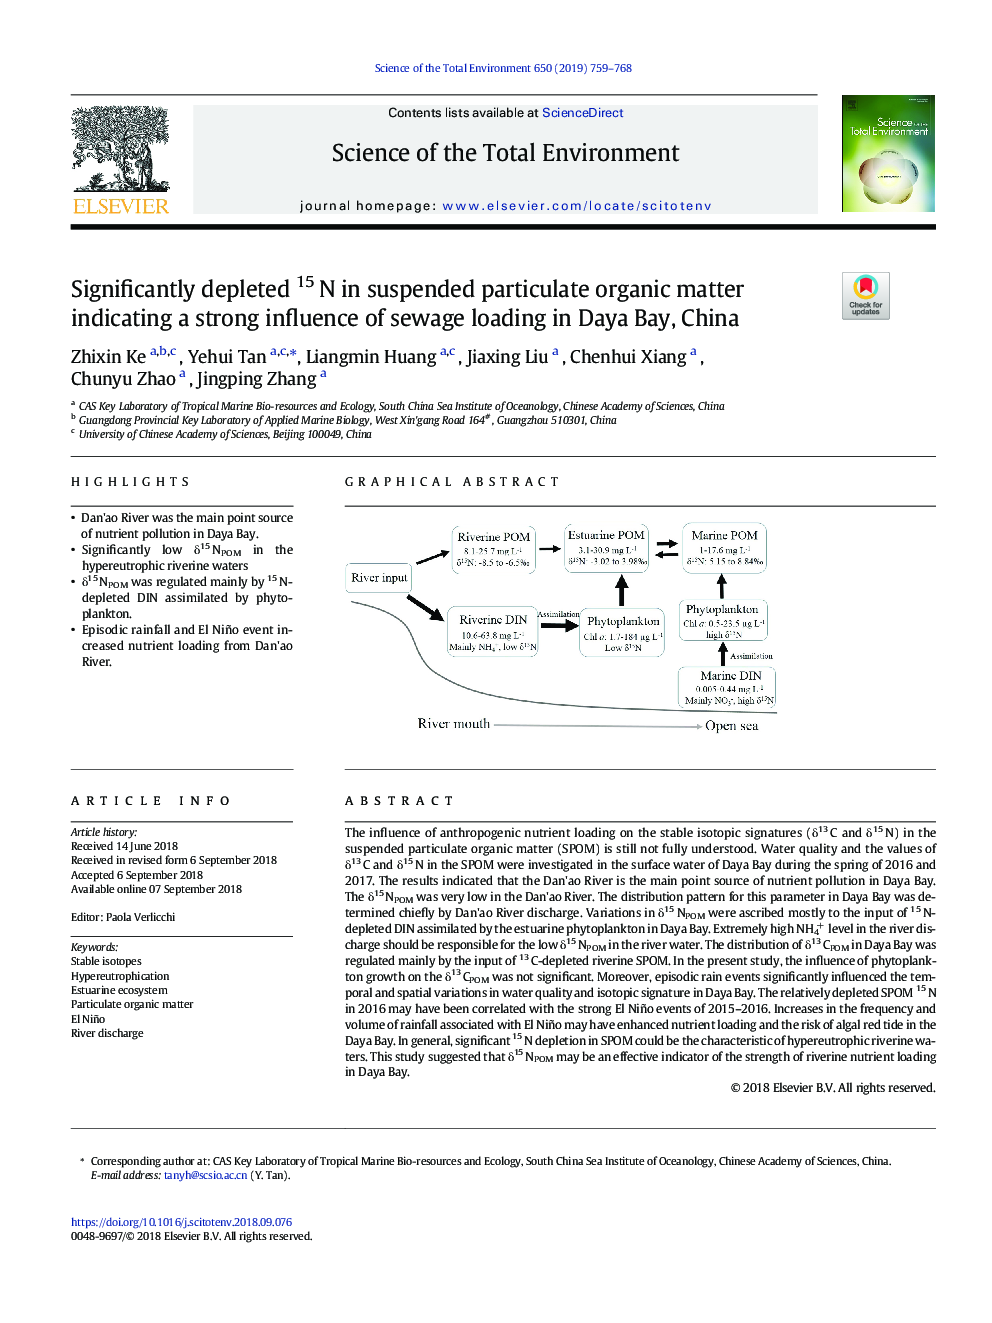 Significantly depleted 15N in suspended particulate organic matter indicating a strong influence of sewage loading in Daya Bay, China